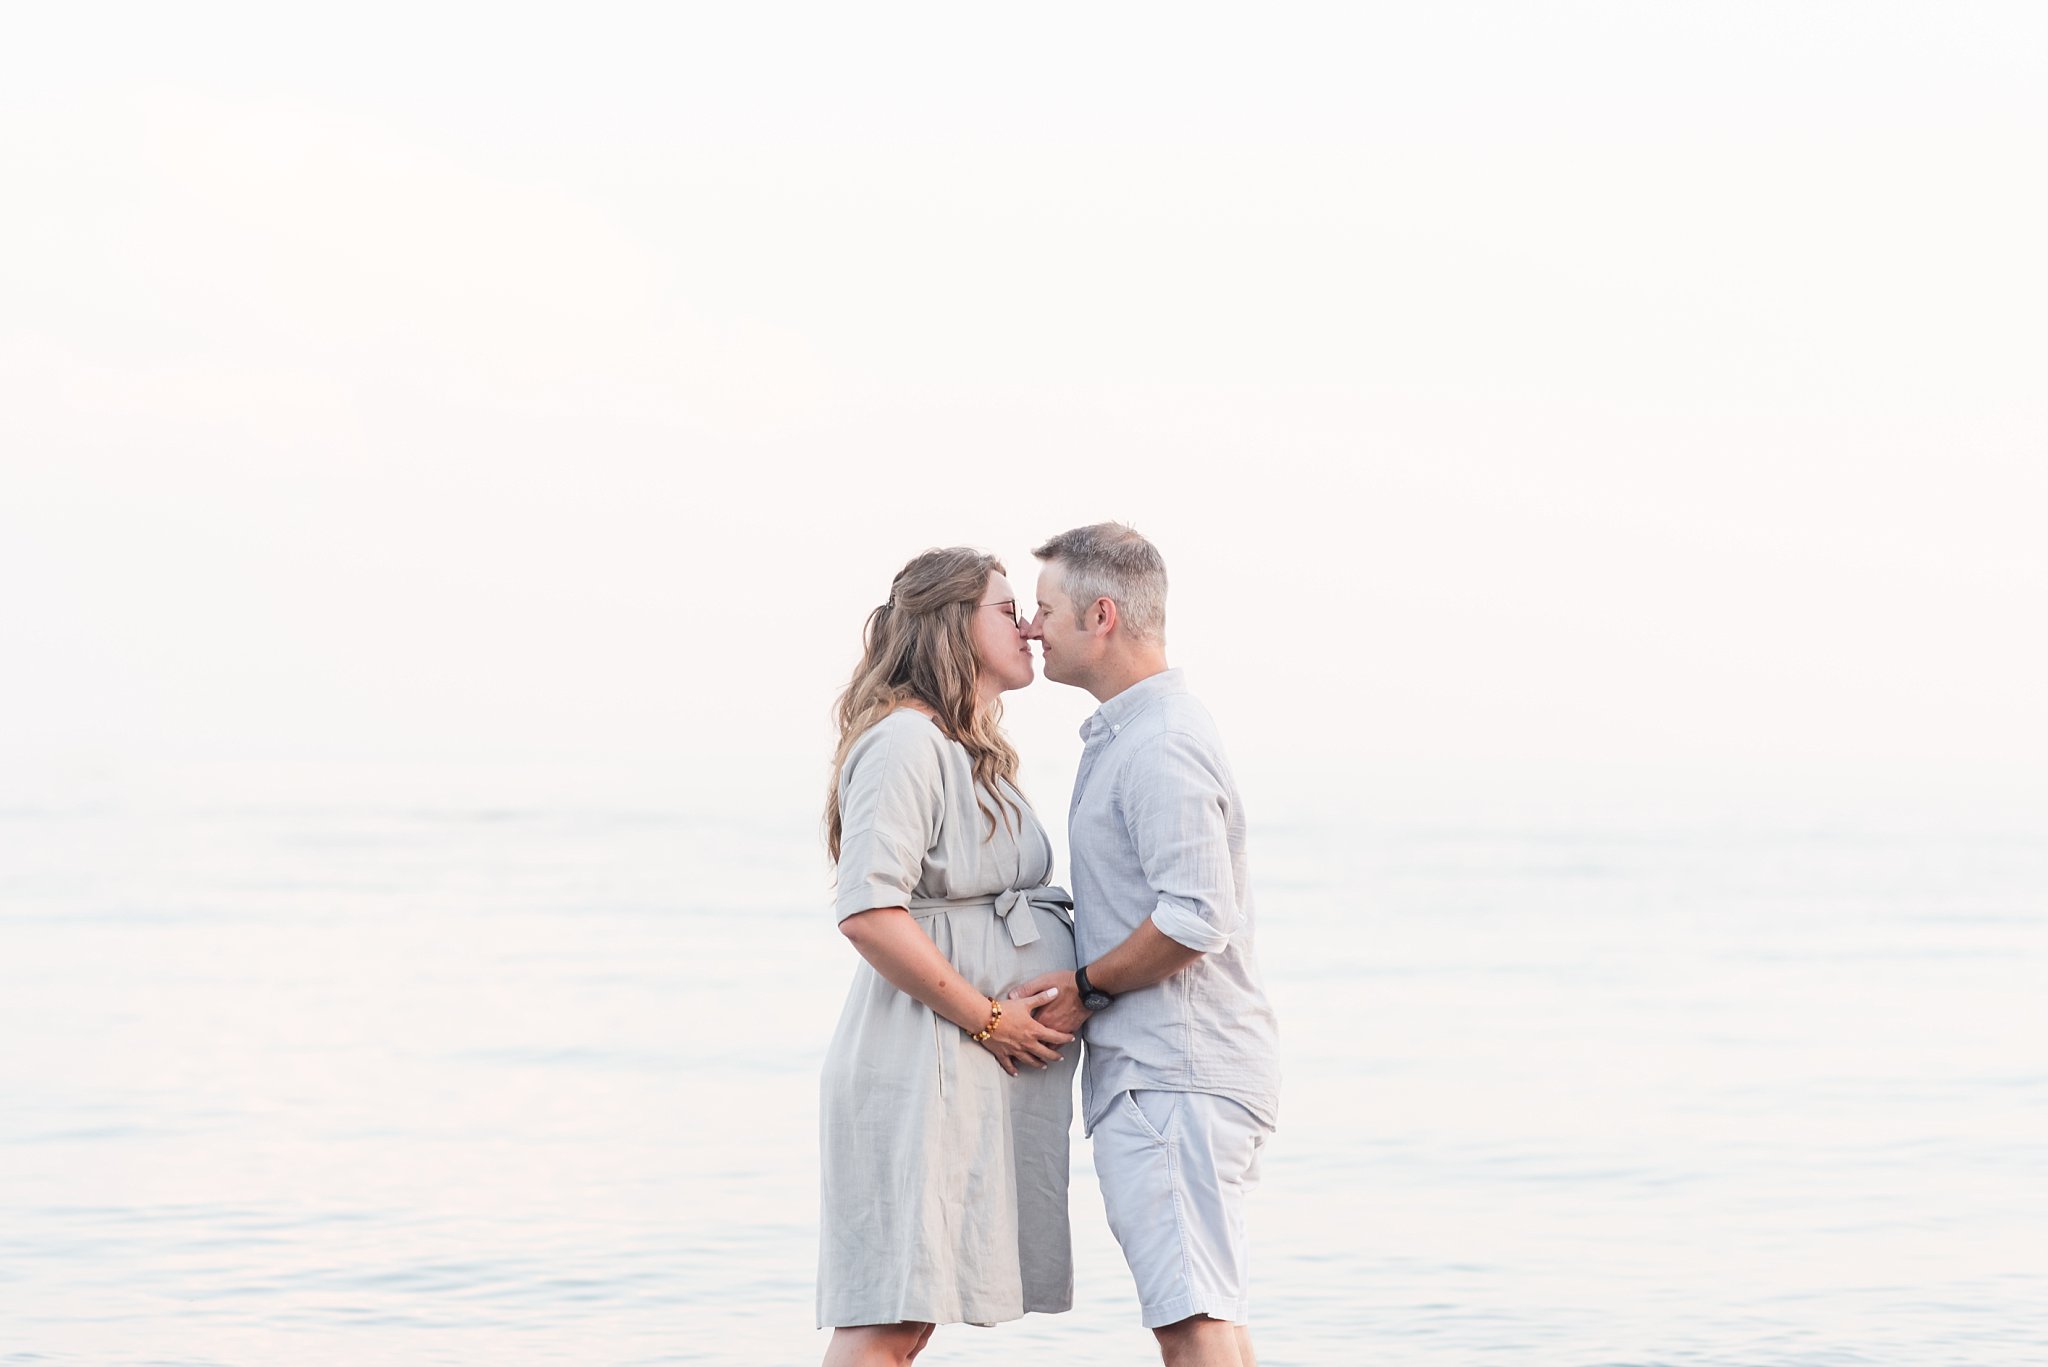 a pregnant woman in a grey dress leans in to kiss her husband, who is wearing a light grey shirt and white shorts. she has long blonde hair and he has grey hair. their hands are holding the woman's belly for their maternity session. family photography london ontario.